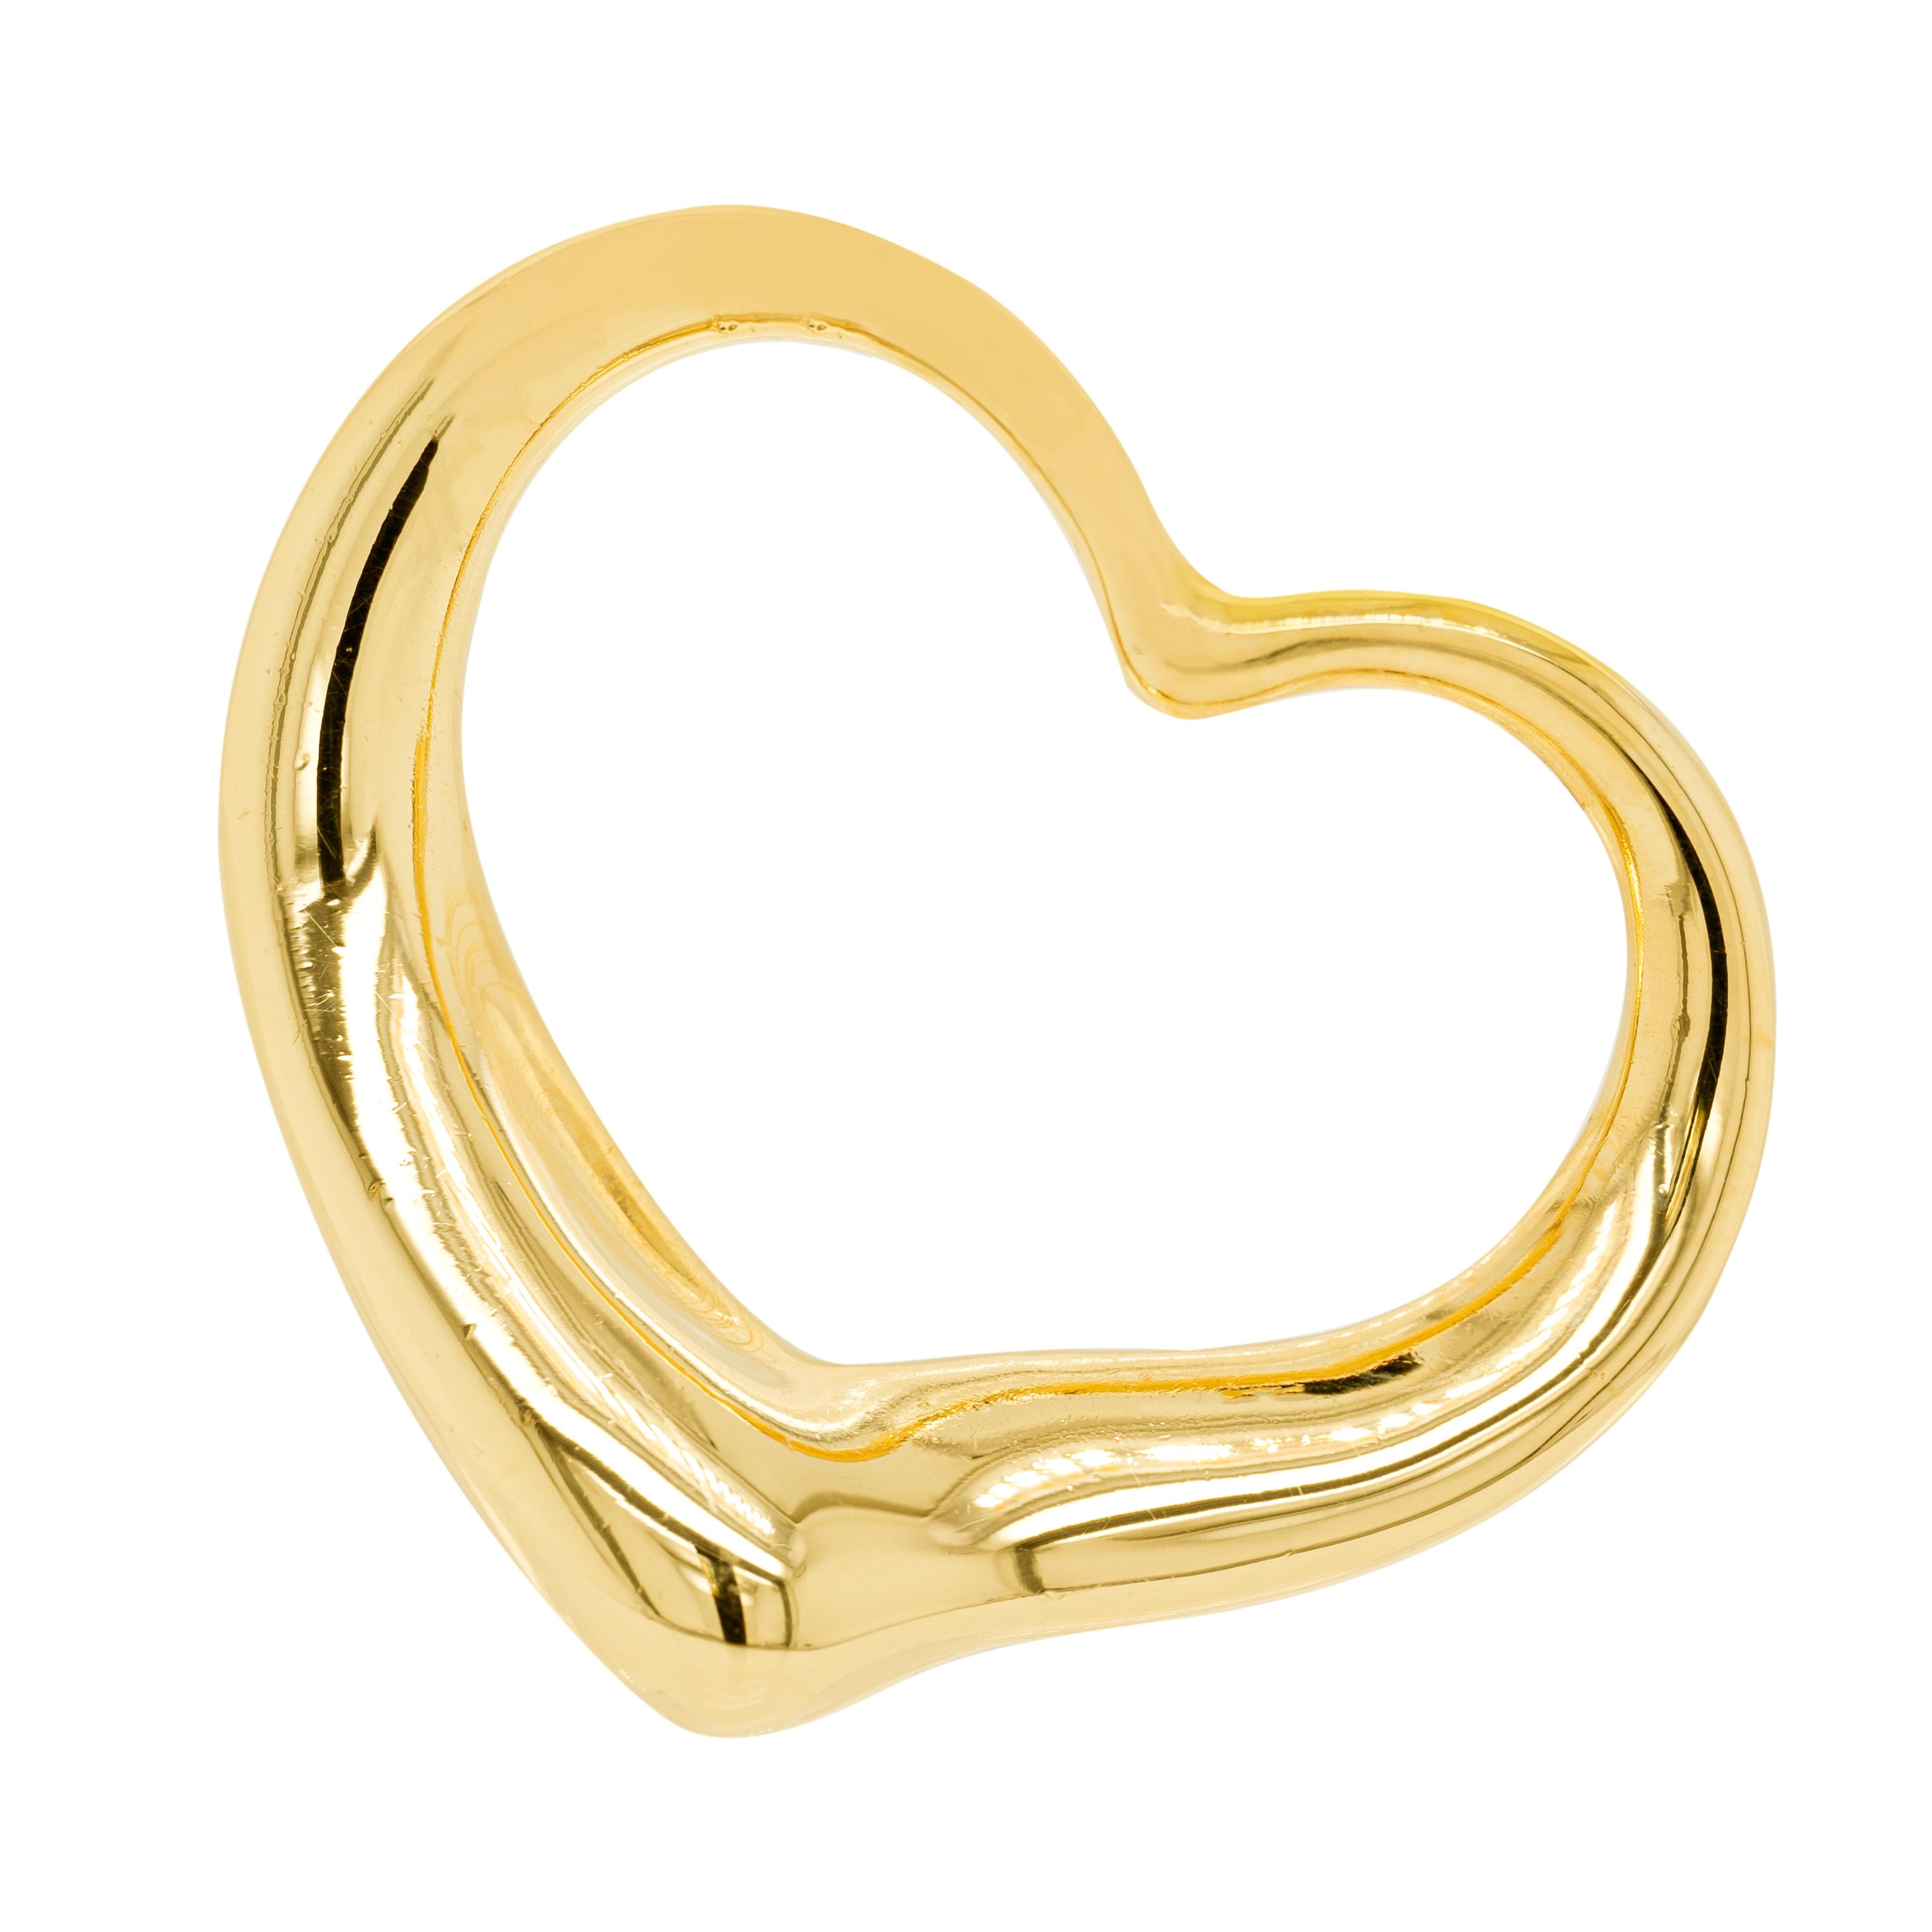 This classic and timeless pendant by Tiffany & Co. from the iconic Elsa Peretti collection is crafted from solid high-polish 18 carat yellow gold and beautifully designed as the stylised outline of a heart. The elegant pendant measures approximately